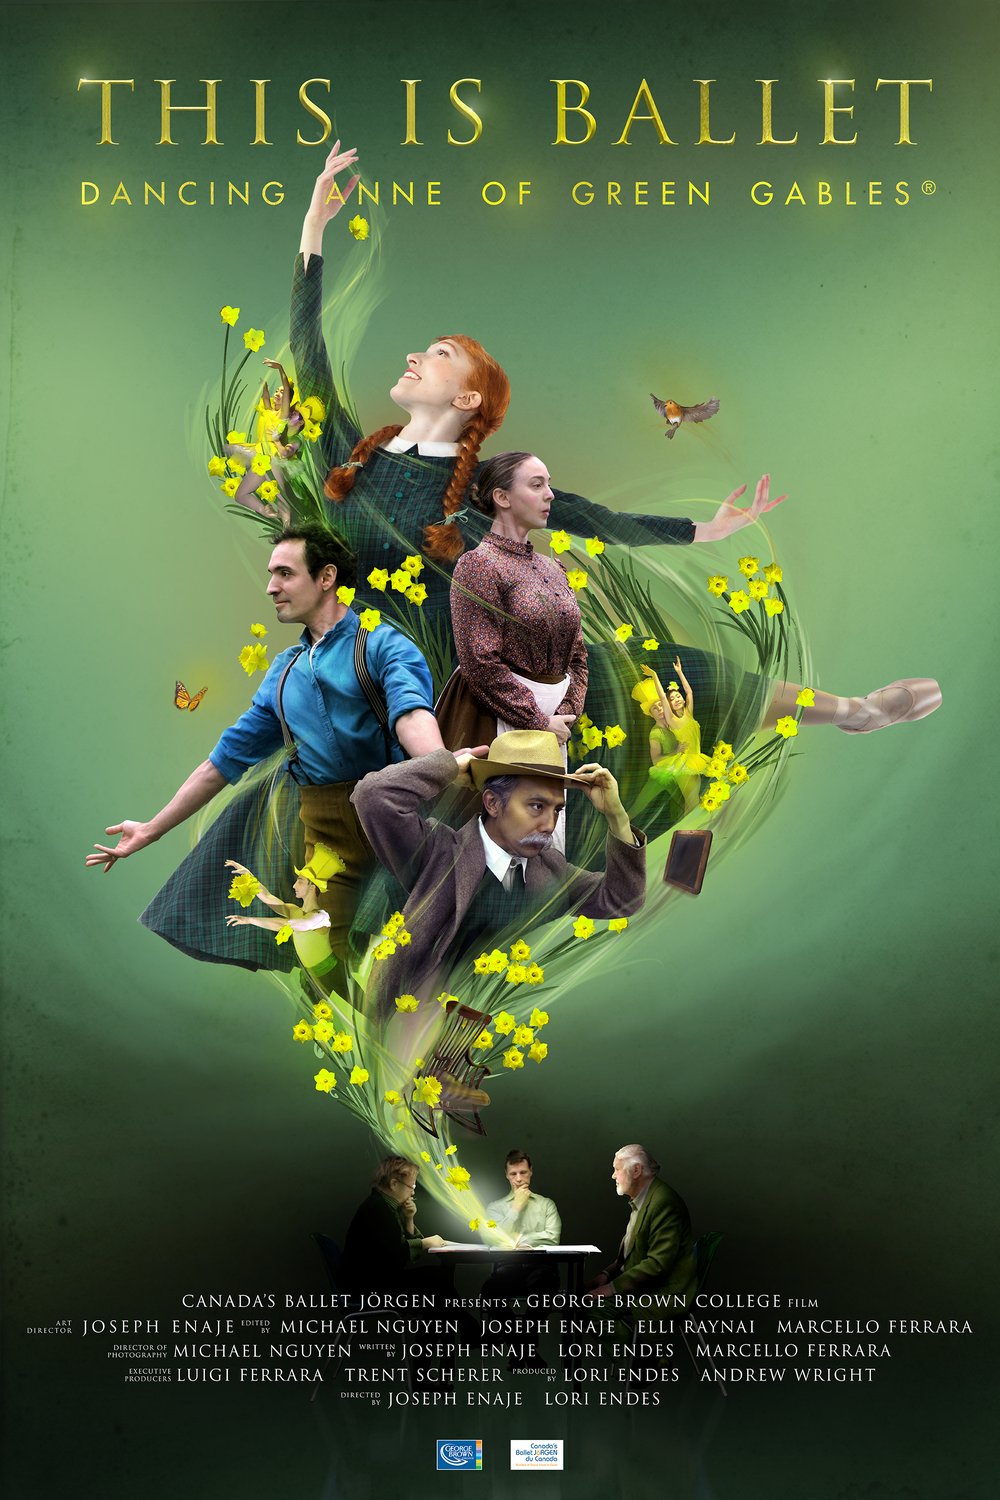 Poster of the movie This is Ballet: Dancing Anne of Green Gables